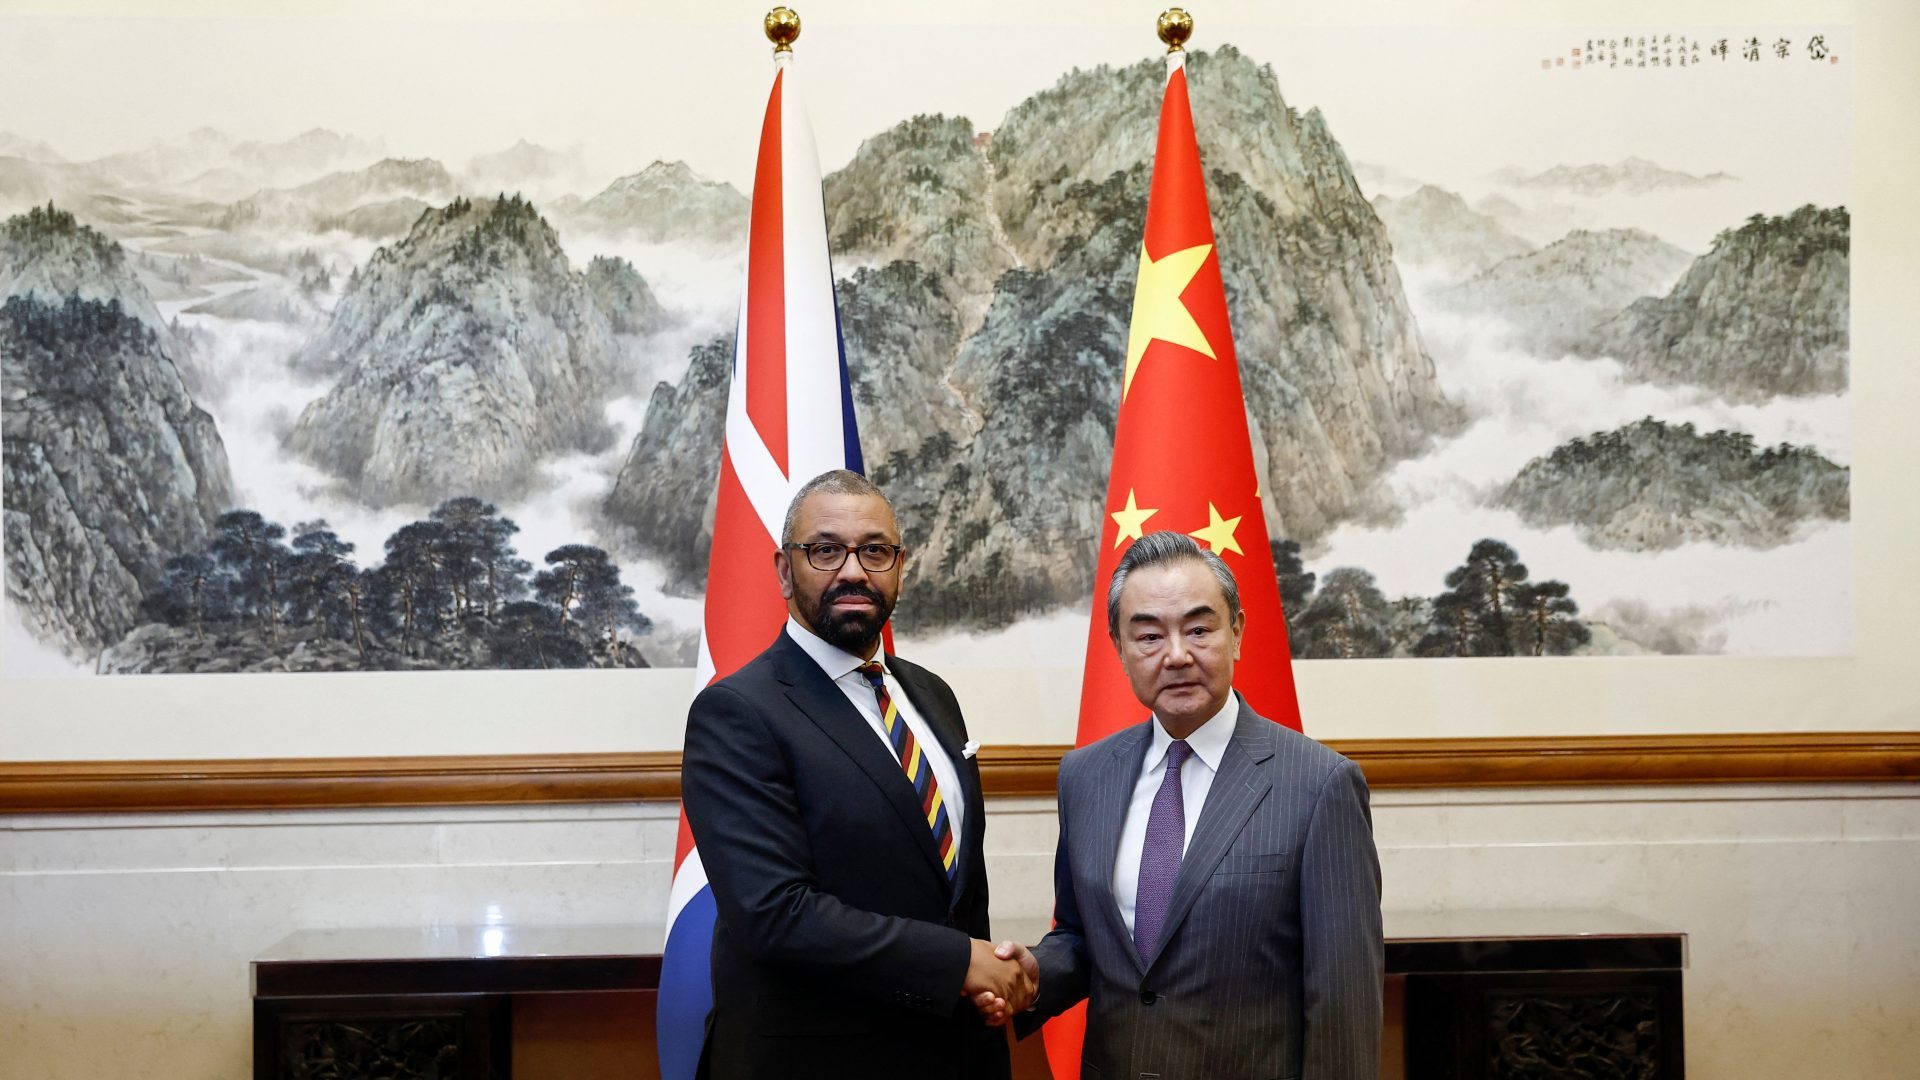 British Foreign Secretary James Cleverly (L) and Chinese Foreign Minister Wang Yi shake hands before a meeting at the Diaoyutai State Guesthouse in Beijing. Photo: FLORENCE LO/POOL/AFP via Getty Images